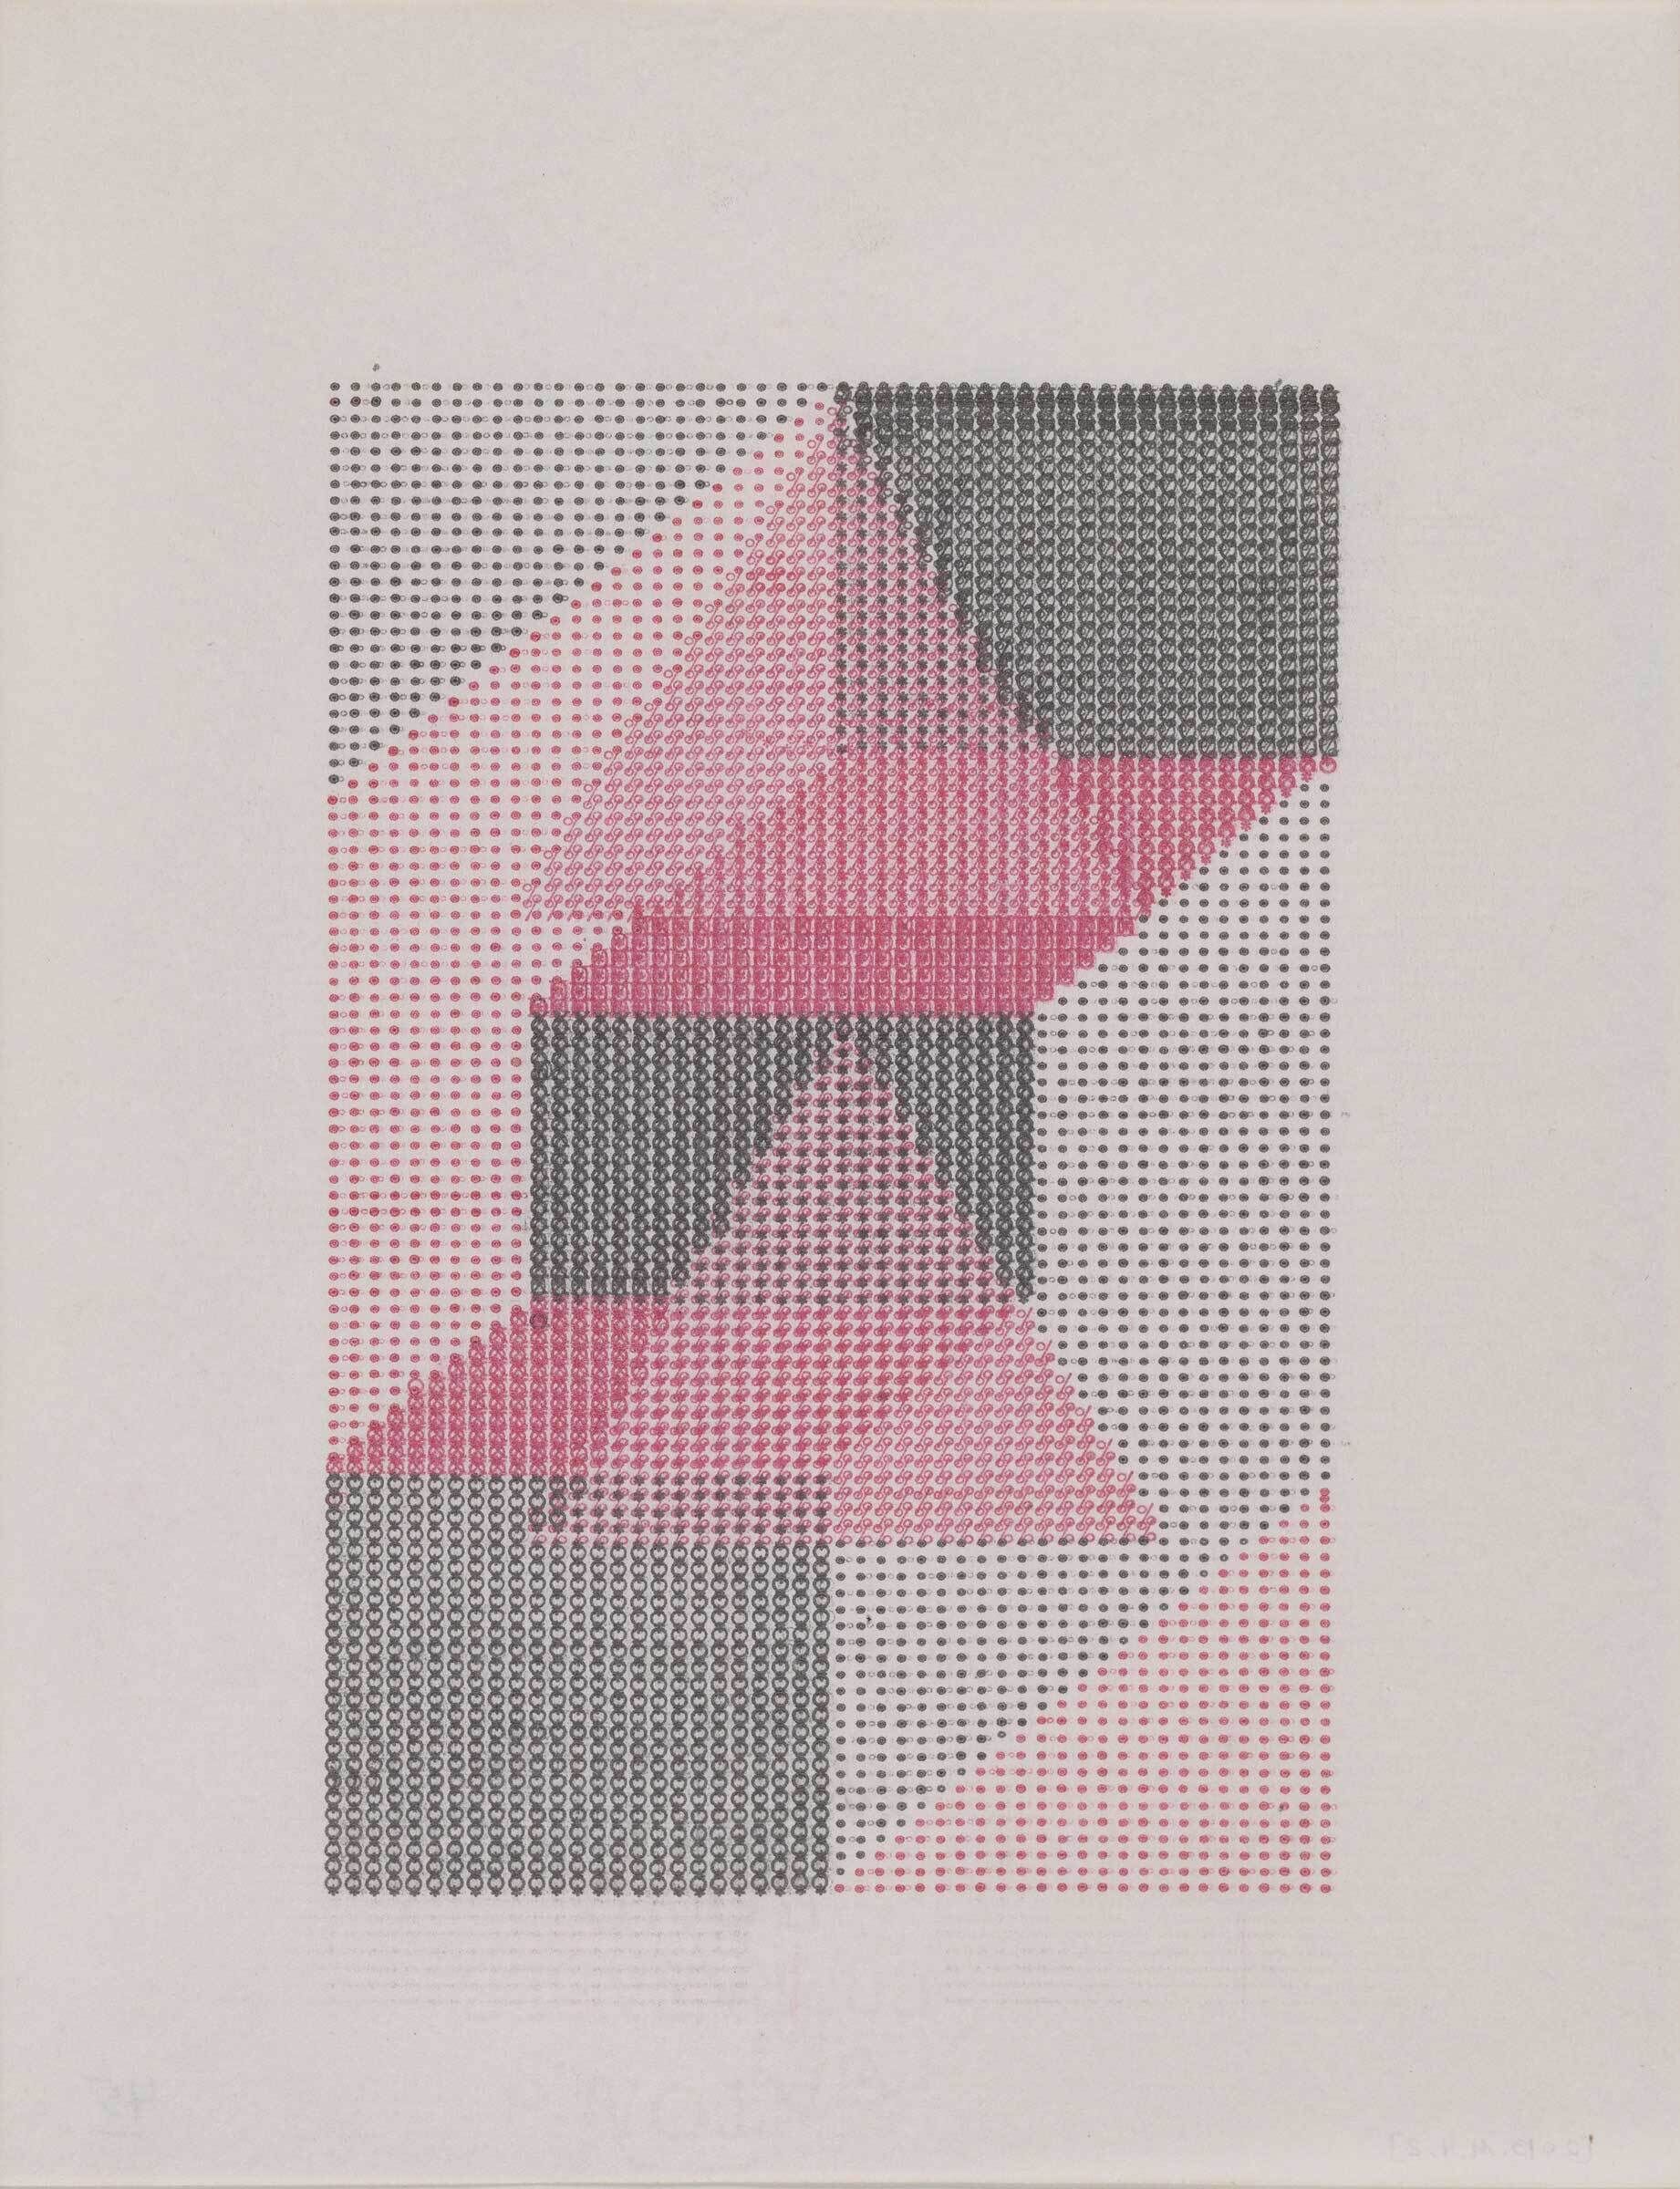 An image of geometric shapes in shades of grey and pink, with a border of white around it.